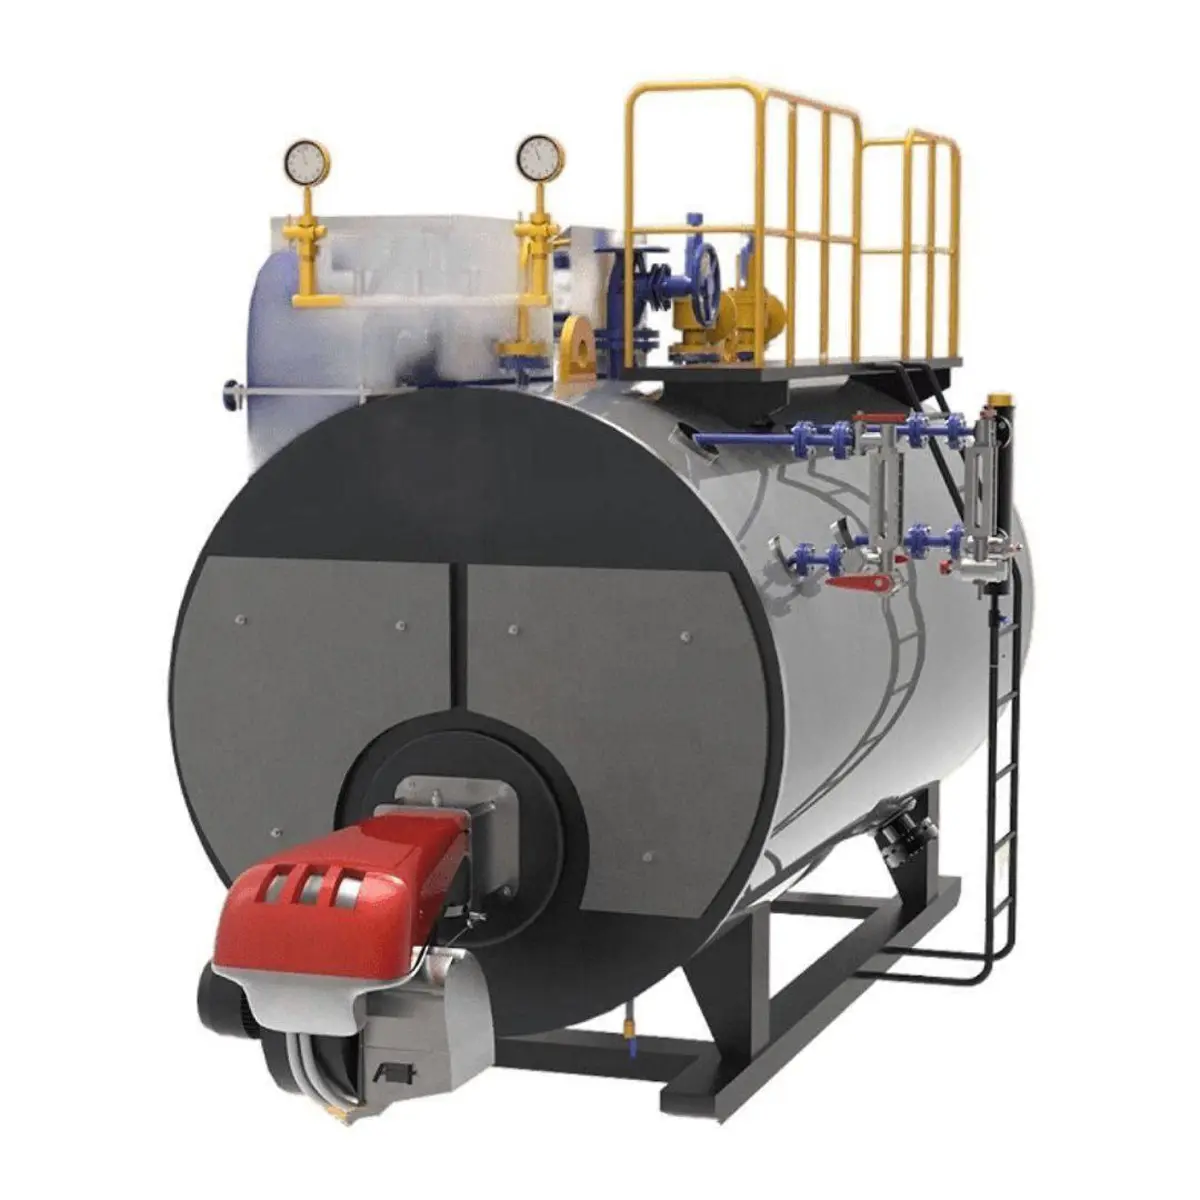 STEAM BOILERS WITH A CAPACITY OF 750 KG STEAM PER HOUR